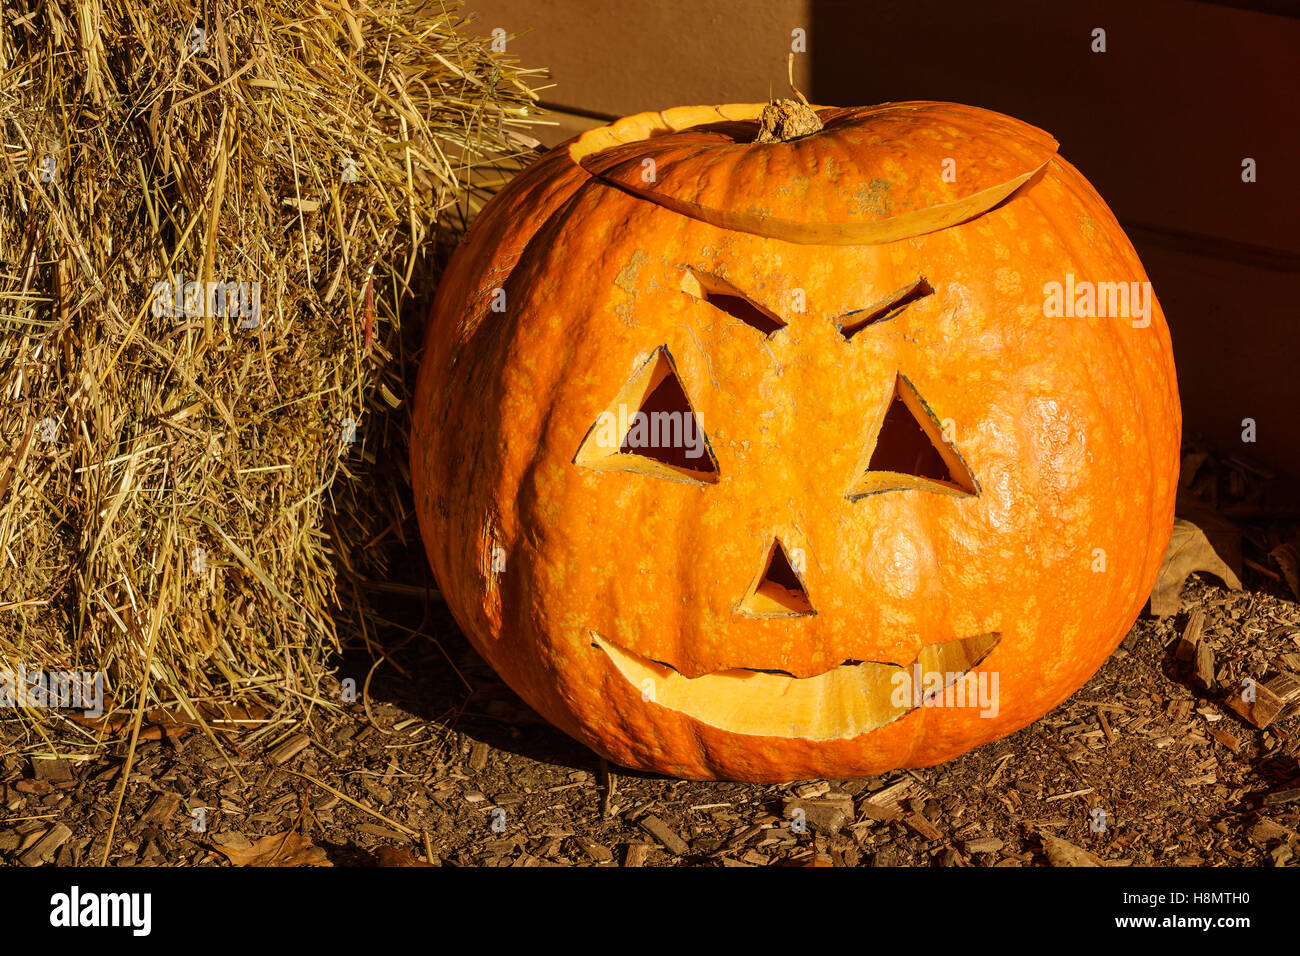 Orange pumpkin with face at halloween time Stock Photo